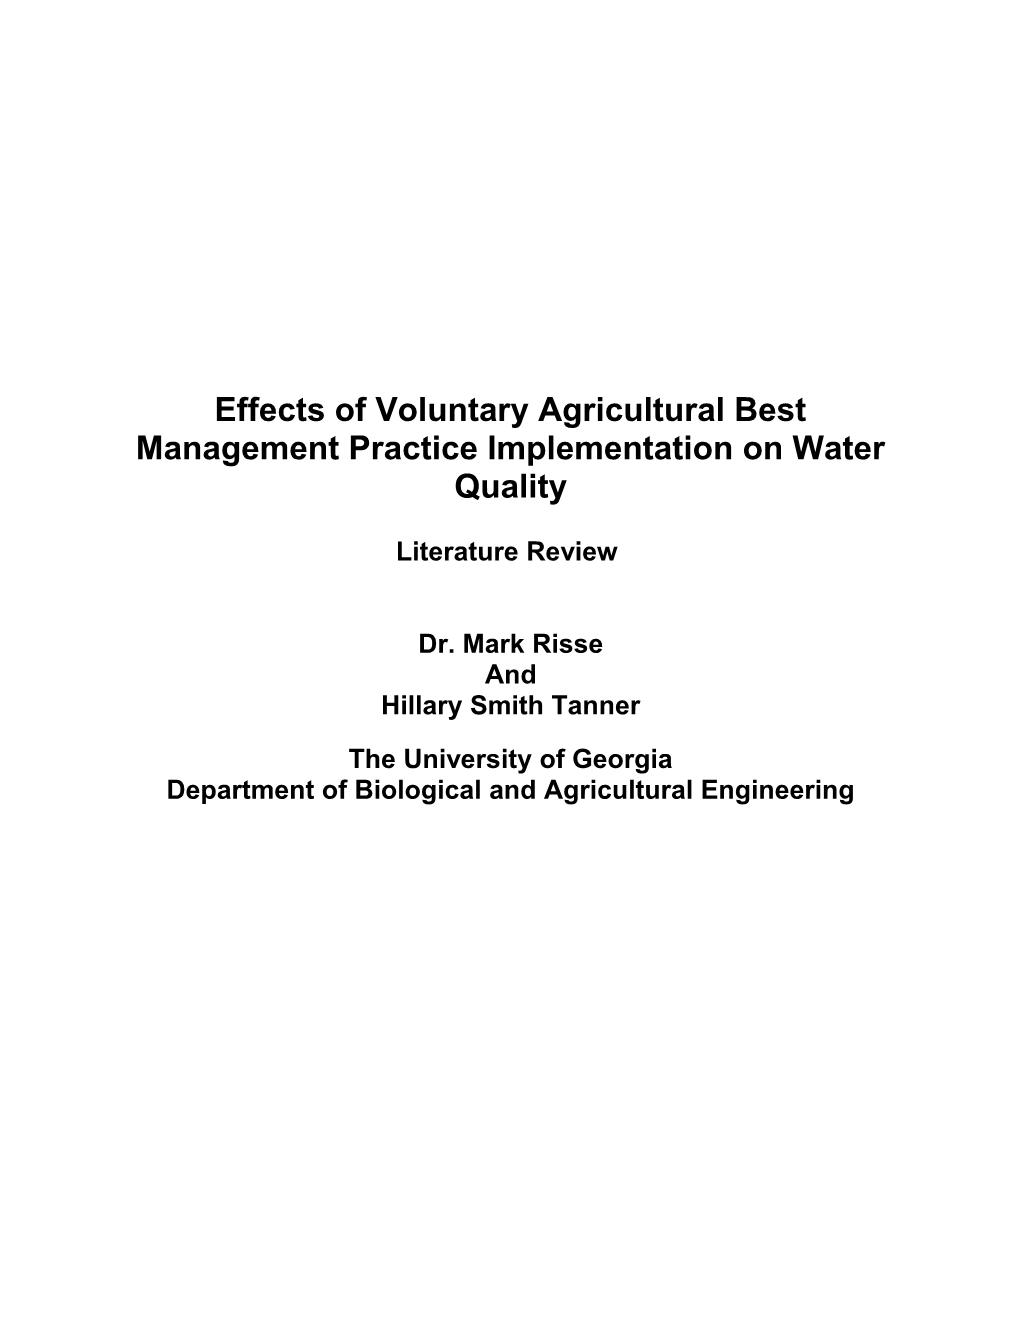 Voluntary Best Management Practice Implementation and Water Quality for Animal Operations